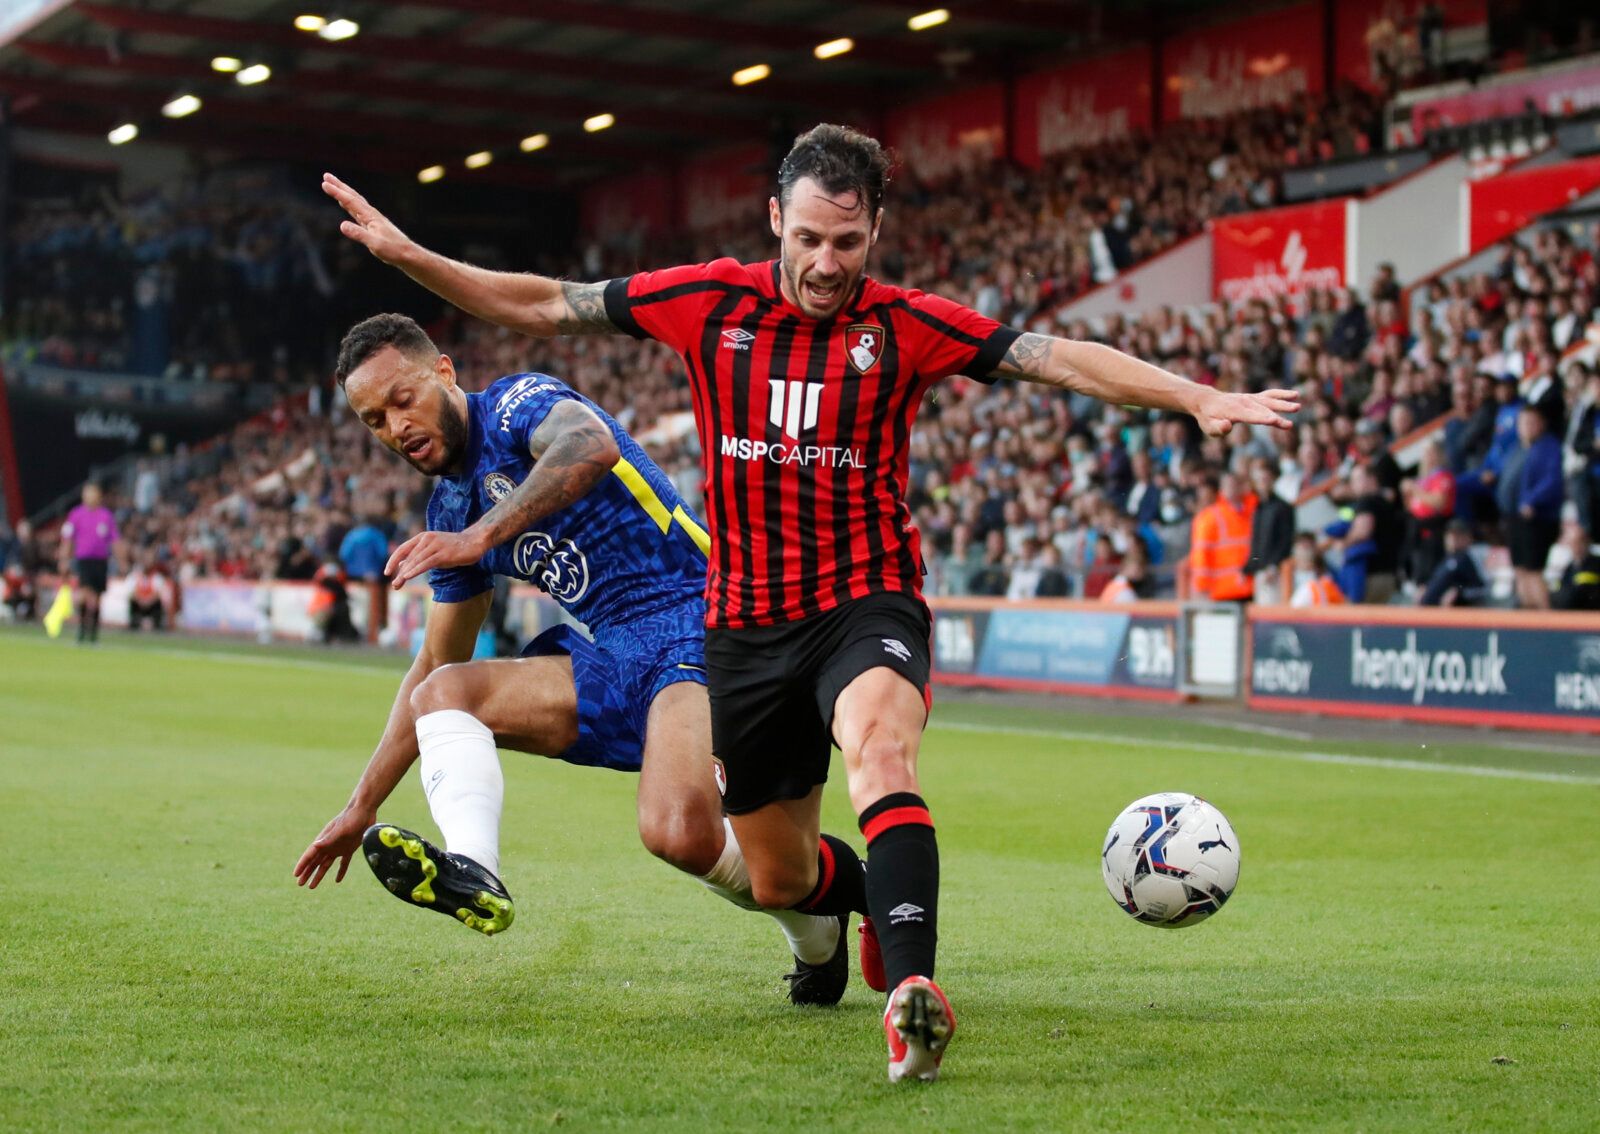 Soccer Football - Pre Season Friendly - AFC Bournemouth v Chelsea - Vitality Stadium, Bournemouth, Britain - July 27, 2021 Chelsea's Lewis Baker in action with Bournemouth's Adam Smith Action Images via Reuters/Peter Cziborra